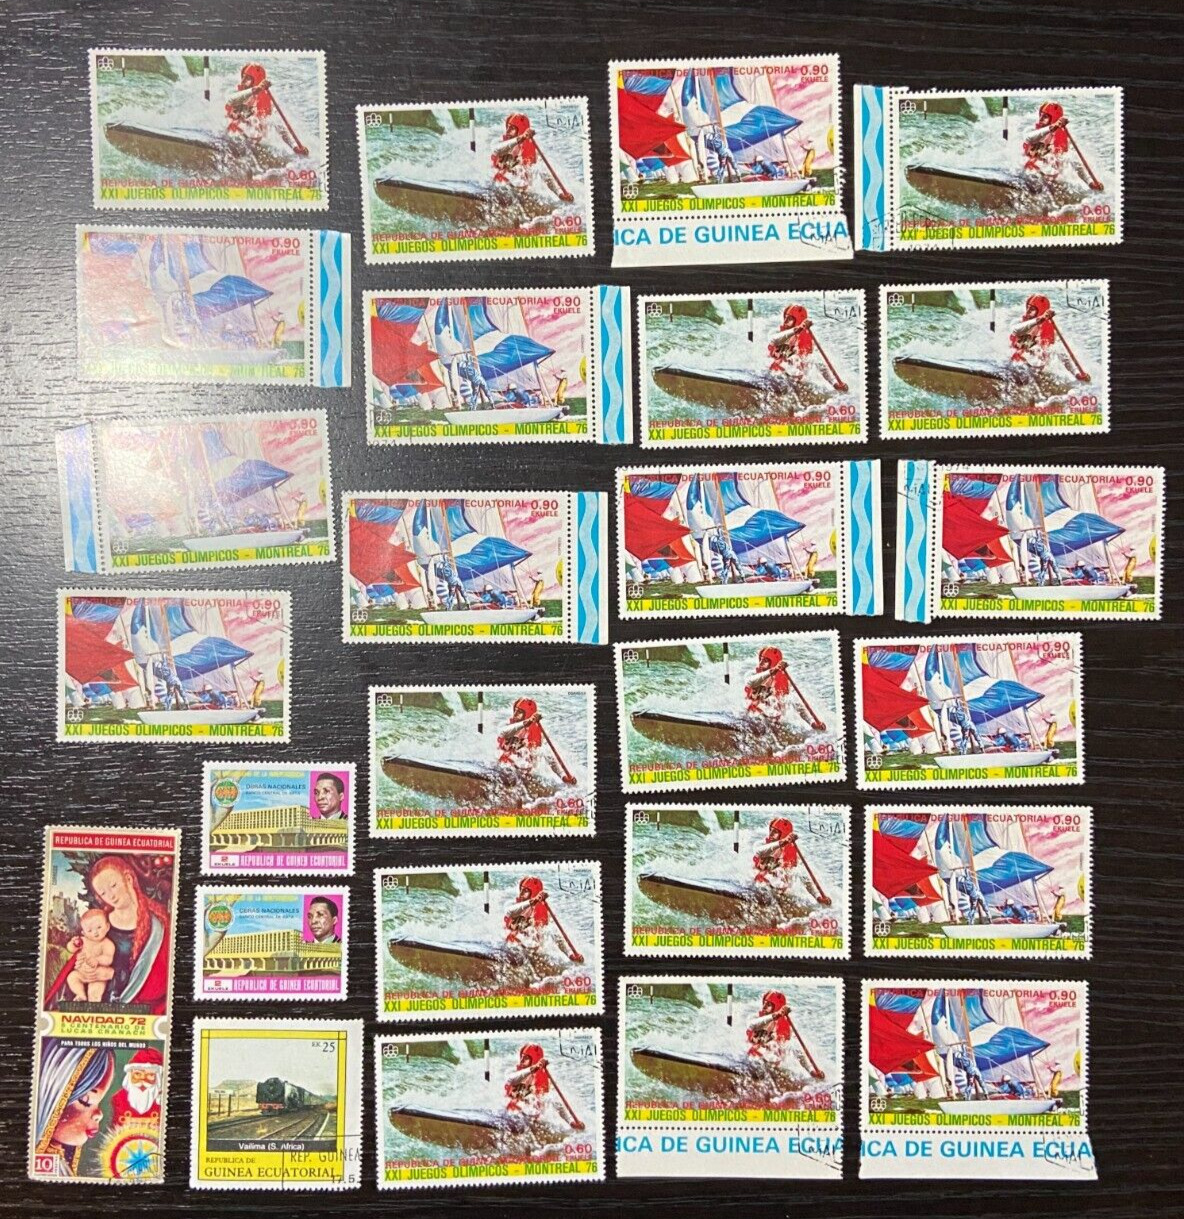 Vintage 1976 Postage Stamp Lot Equatorial Guinea Olympic Stamps